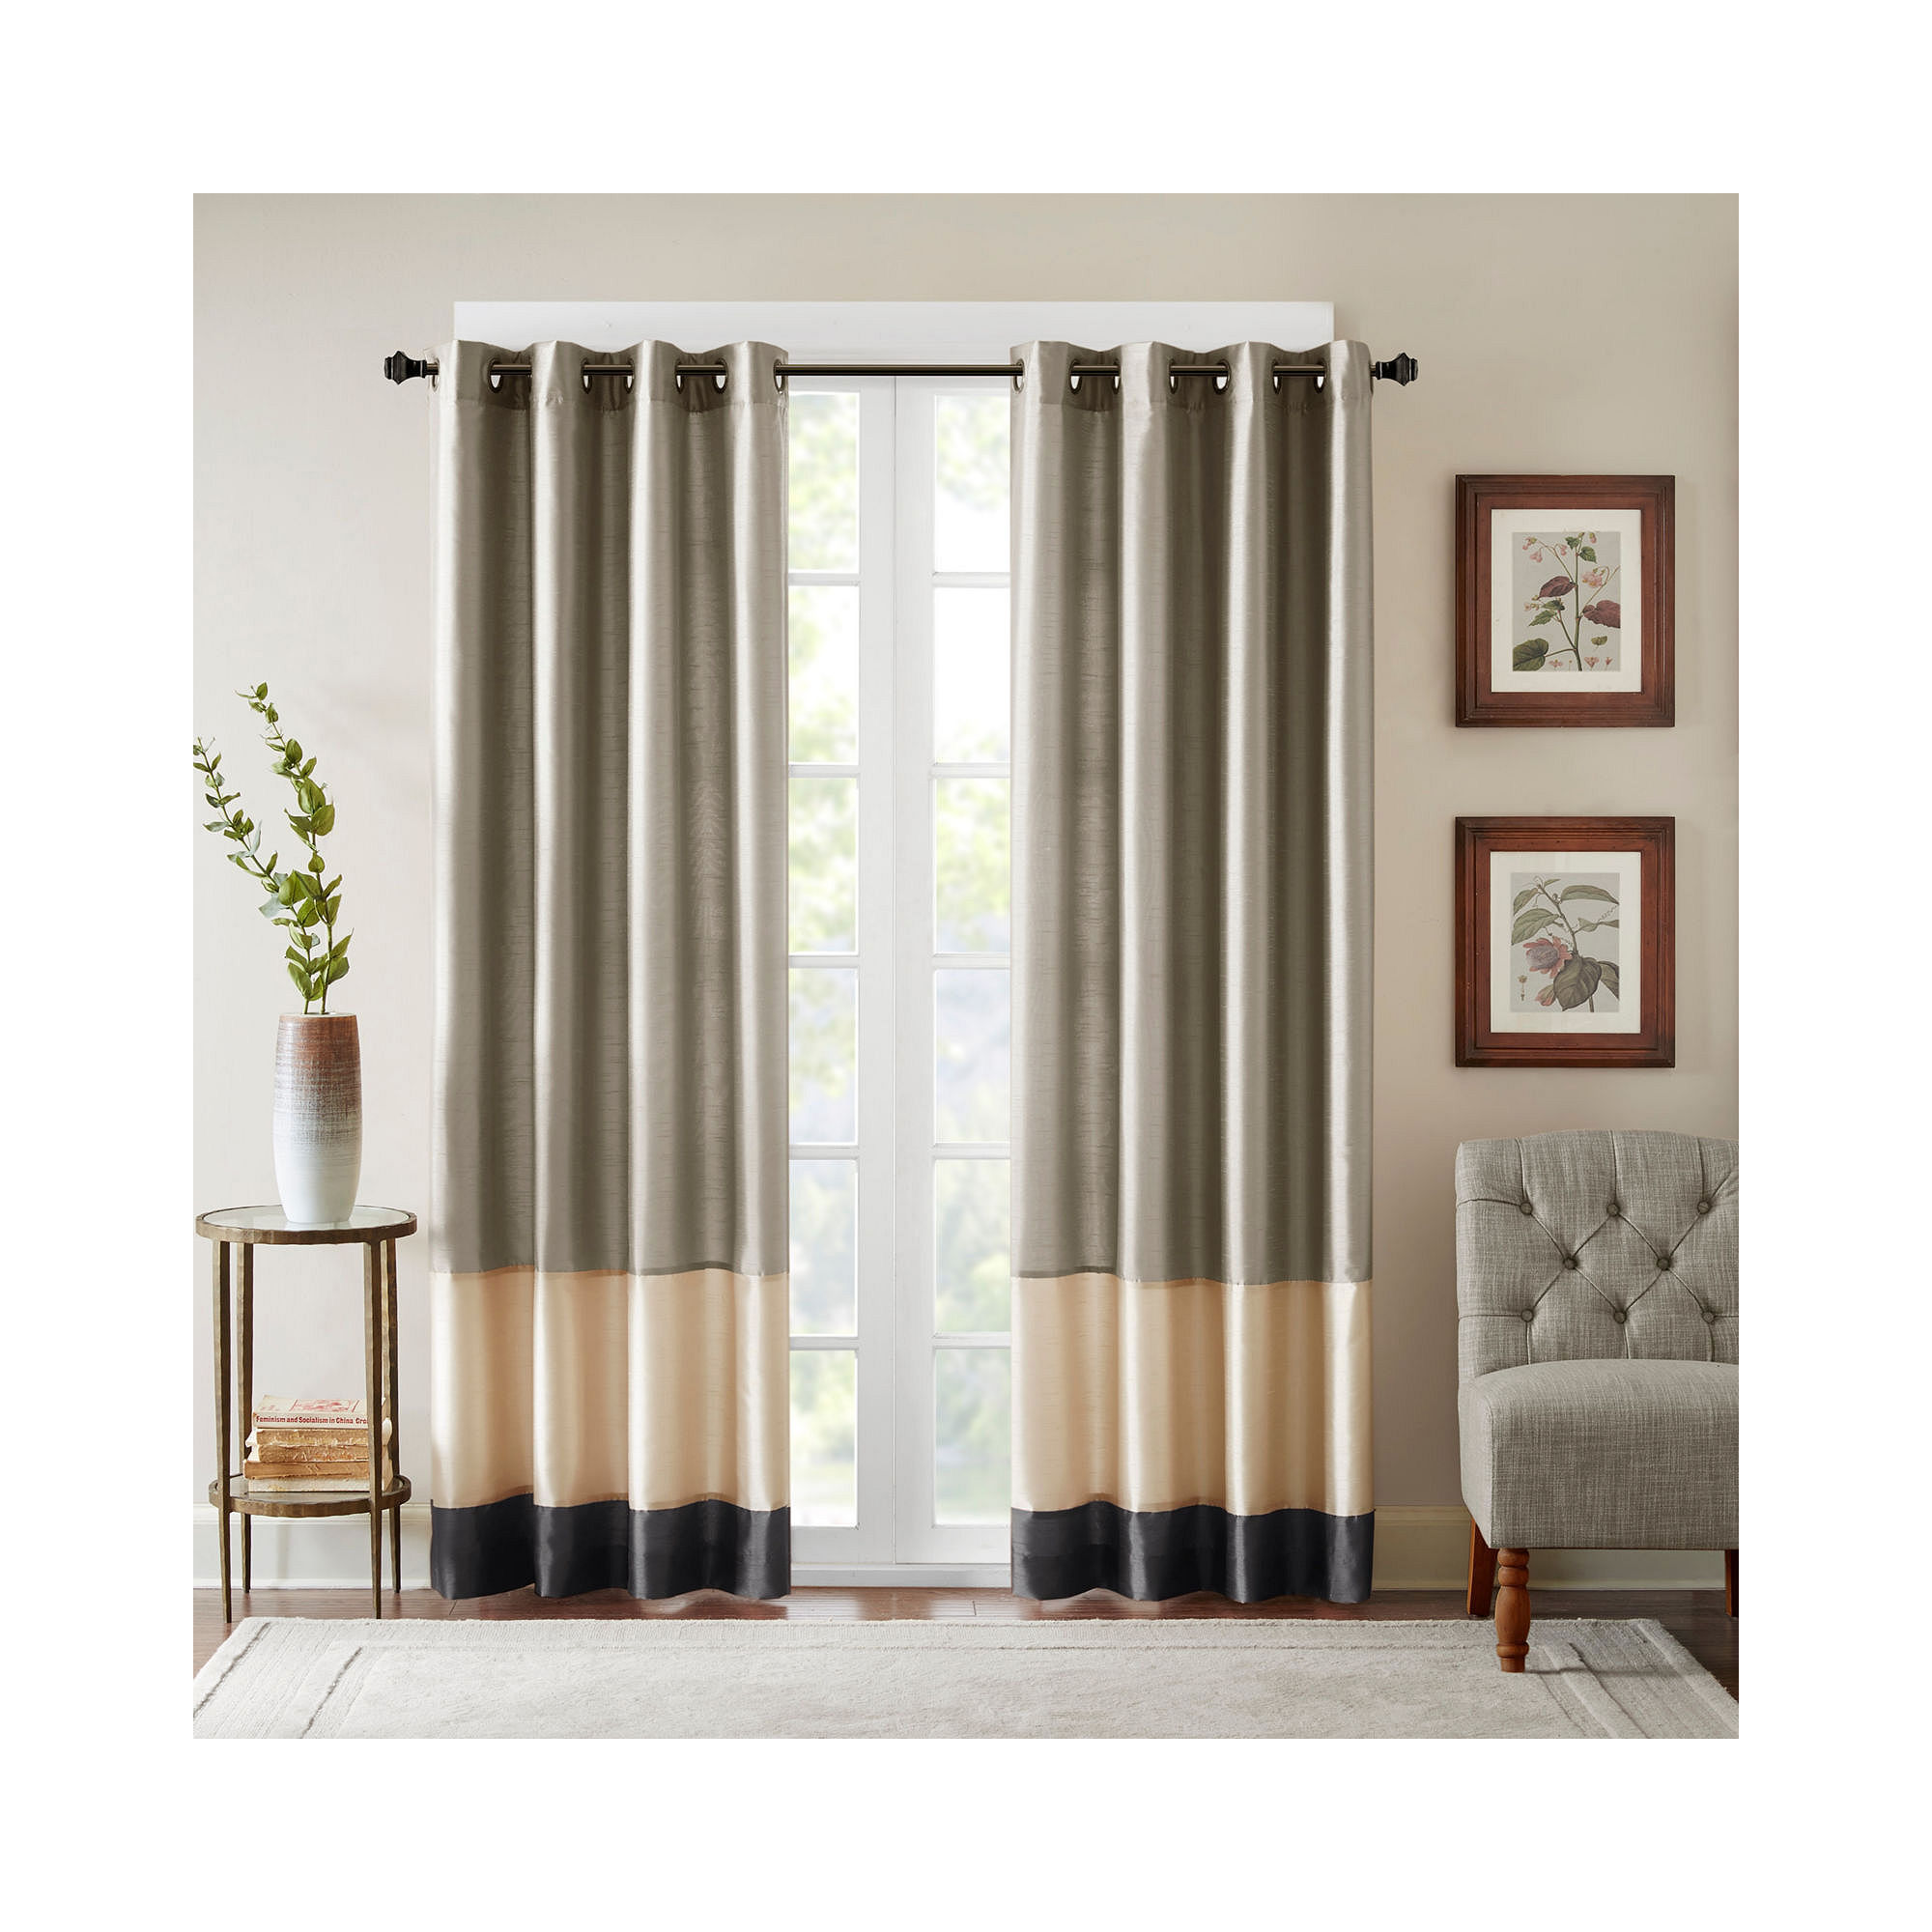 UPC 675716716608 product image for Conner Grommet-Top Curtain Panel | upcitemdb.com